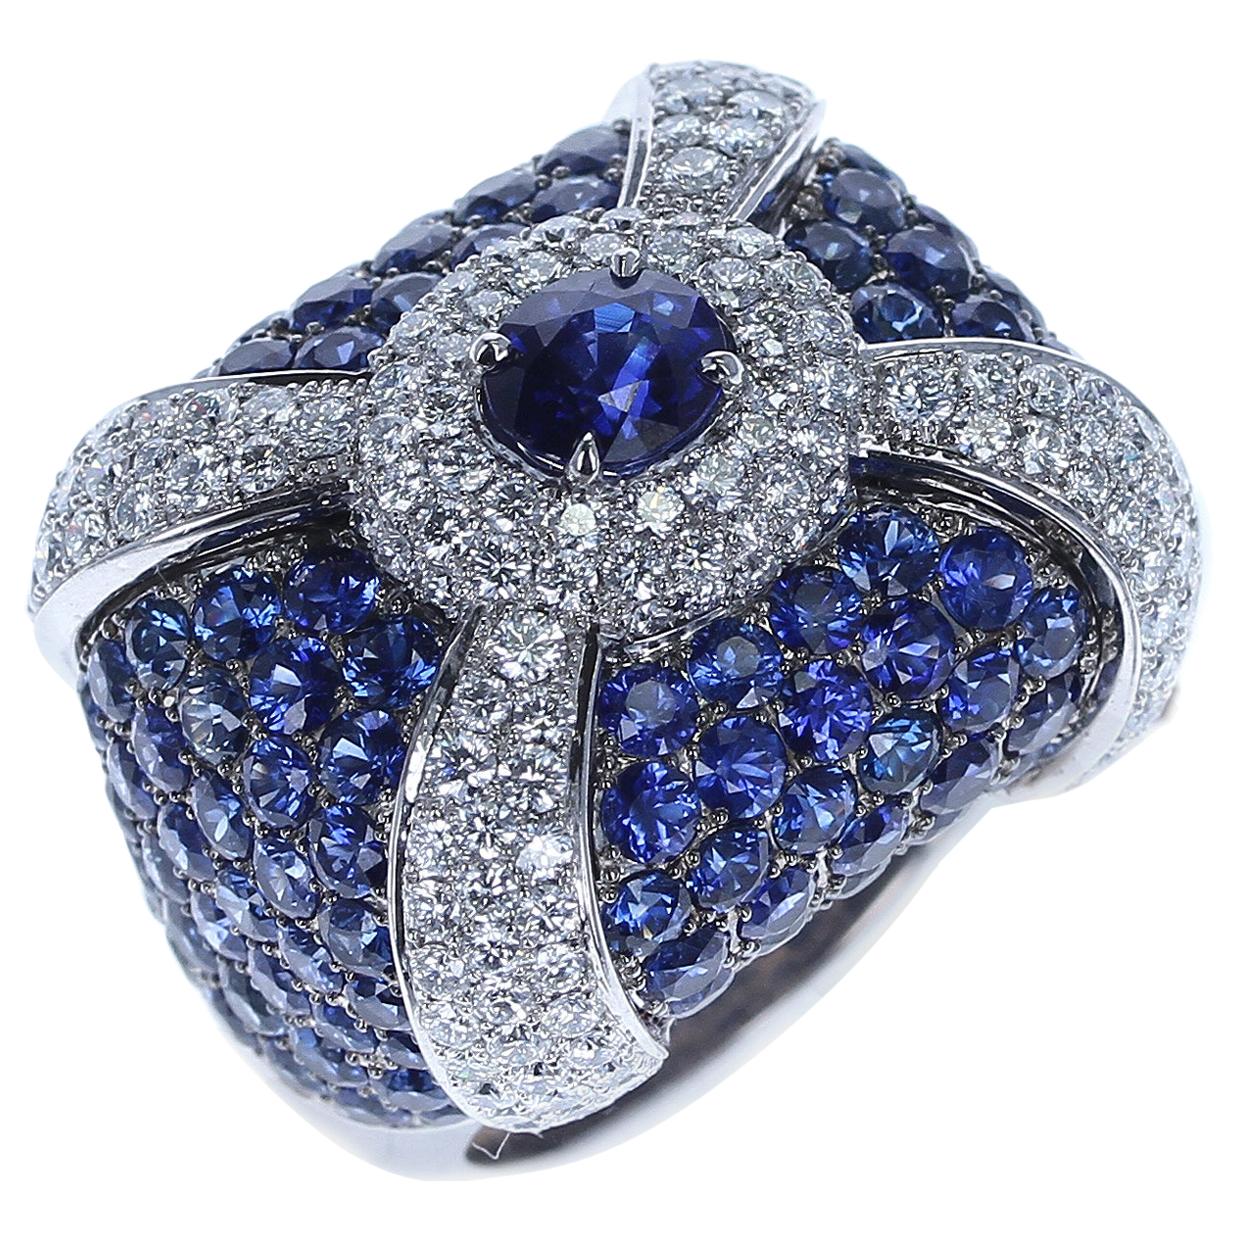 LEVIEV Sapphire Cocktail Ring with Pave Sapphires and Diamonds, 18K Gold